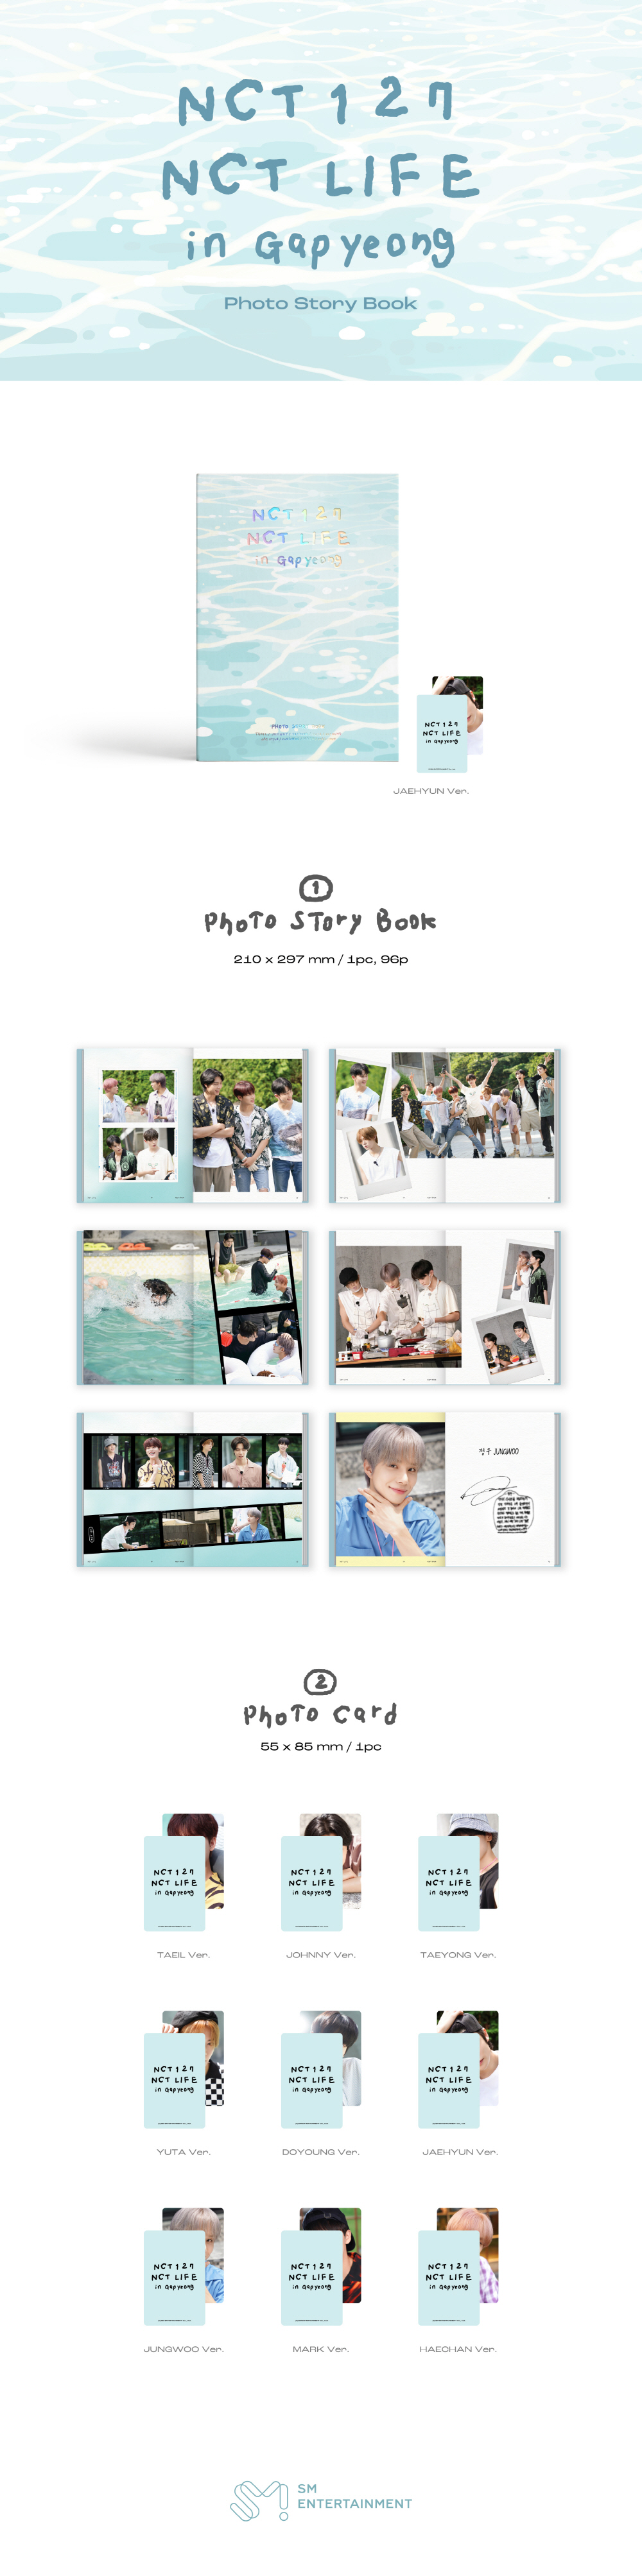 NCT 127 [NCT LIFE in Gapyeong] PHOTO STORY BOOK (DOYOUNG) nct127 photobook NCT127Gapyeong Gapyeong PHOTOSTORYBOOK NCT127photobook NCT127photostorybook